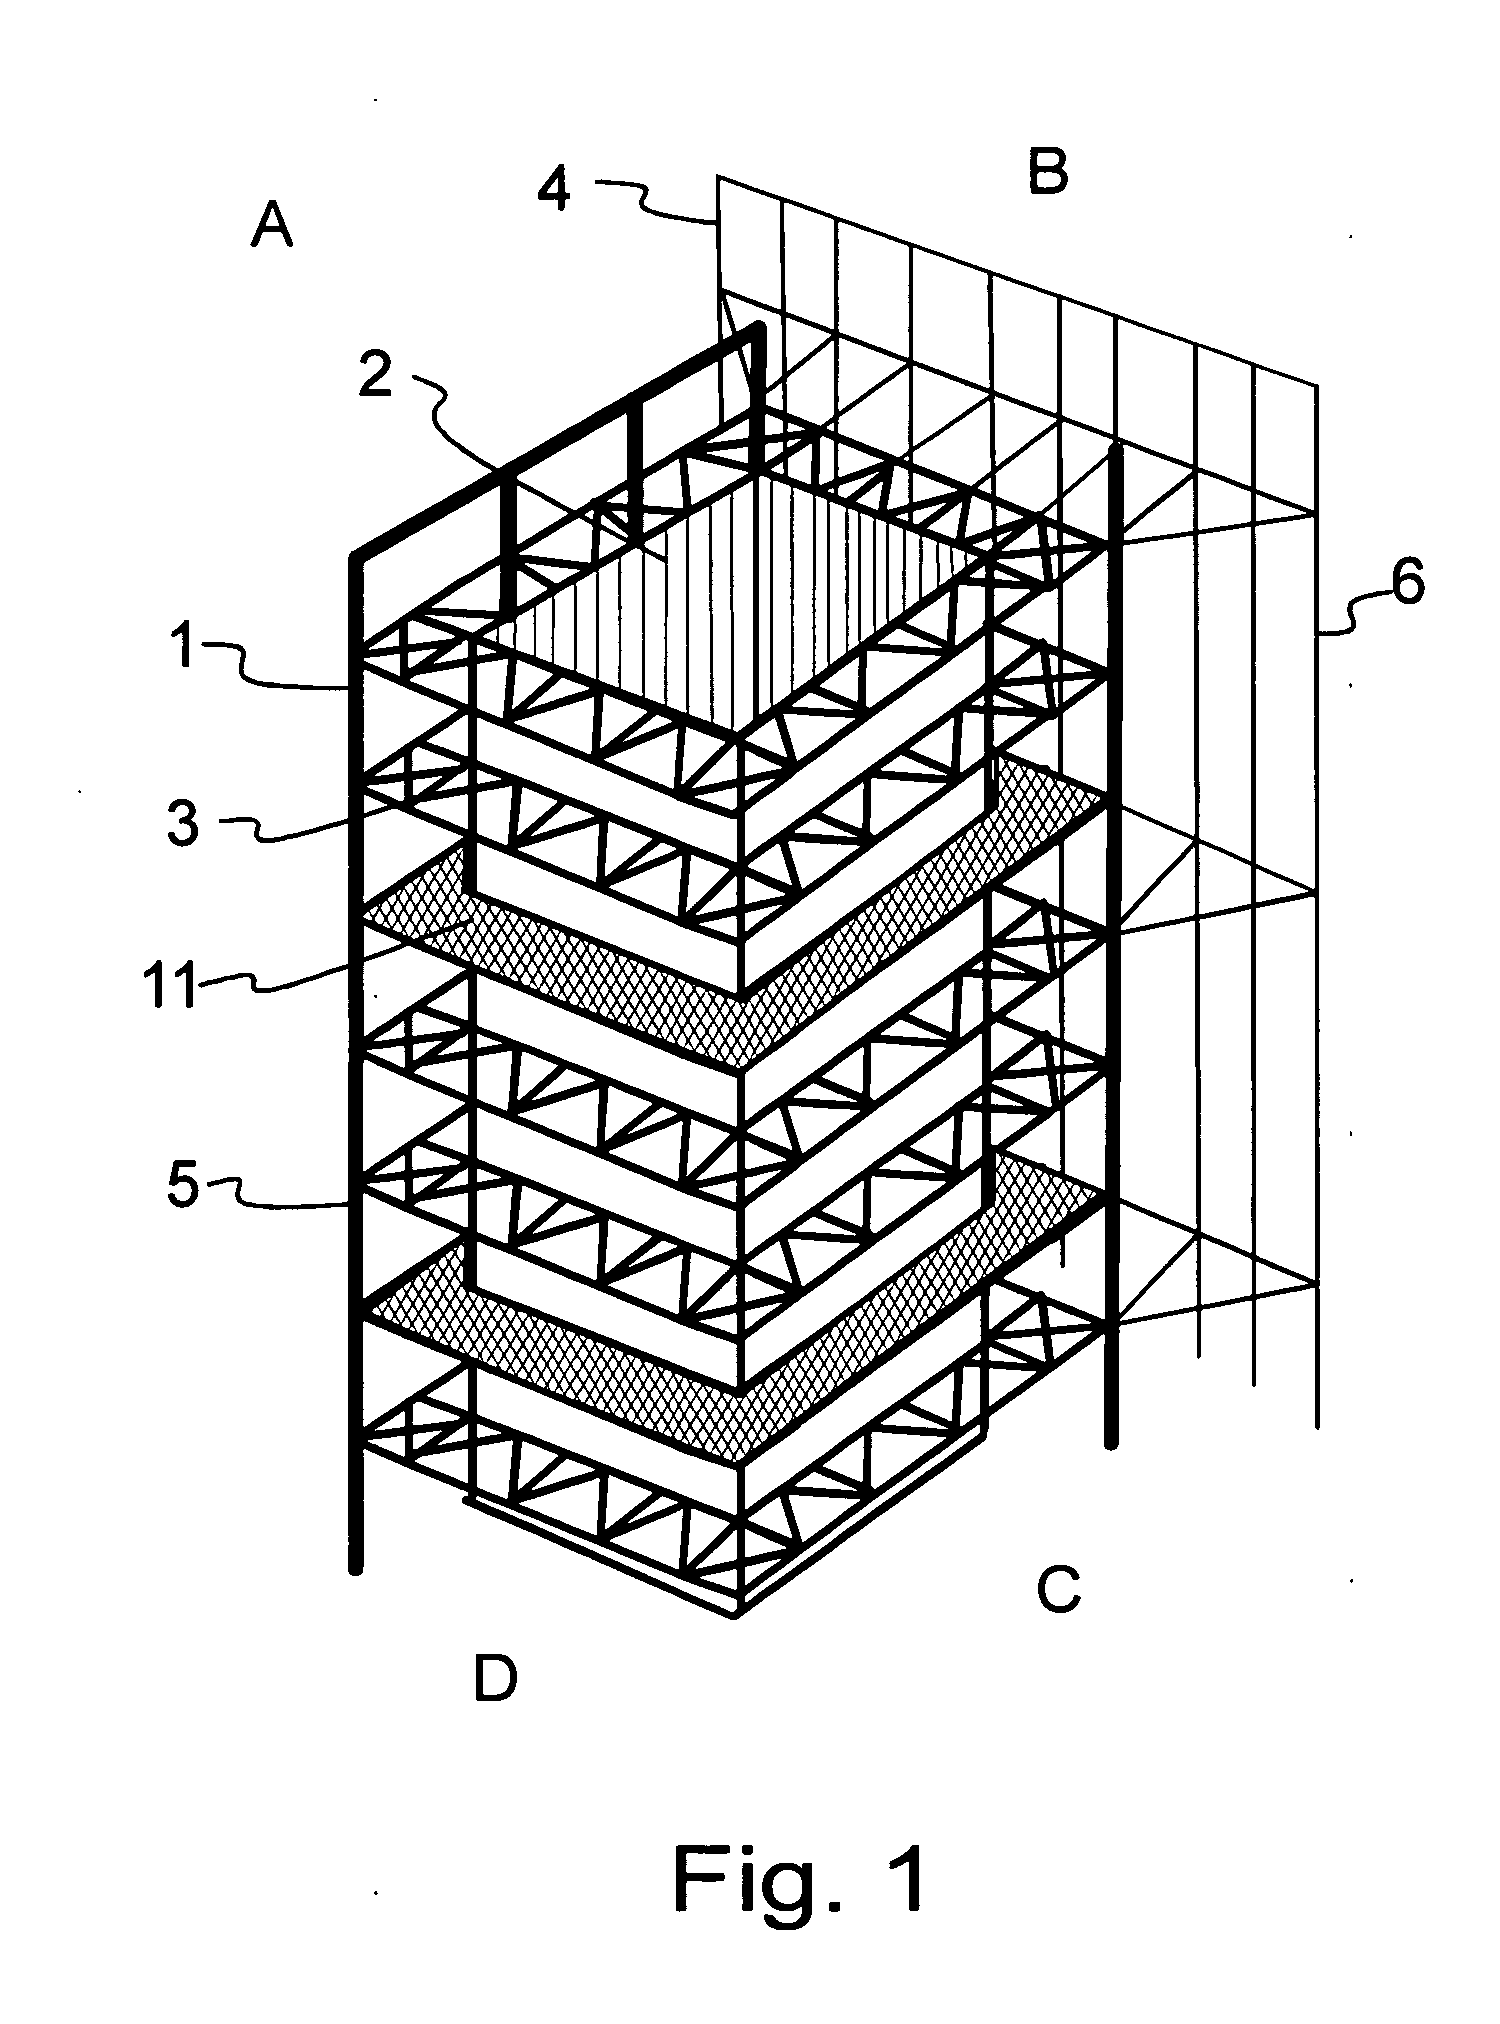 Boiler plant, a support structure and a method for supporting the walls of a steam boiler of a boiler plant